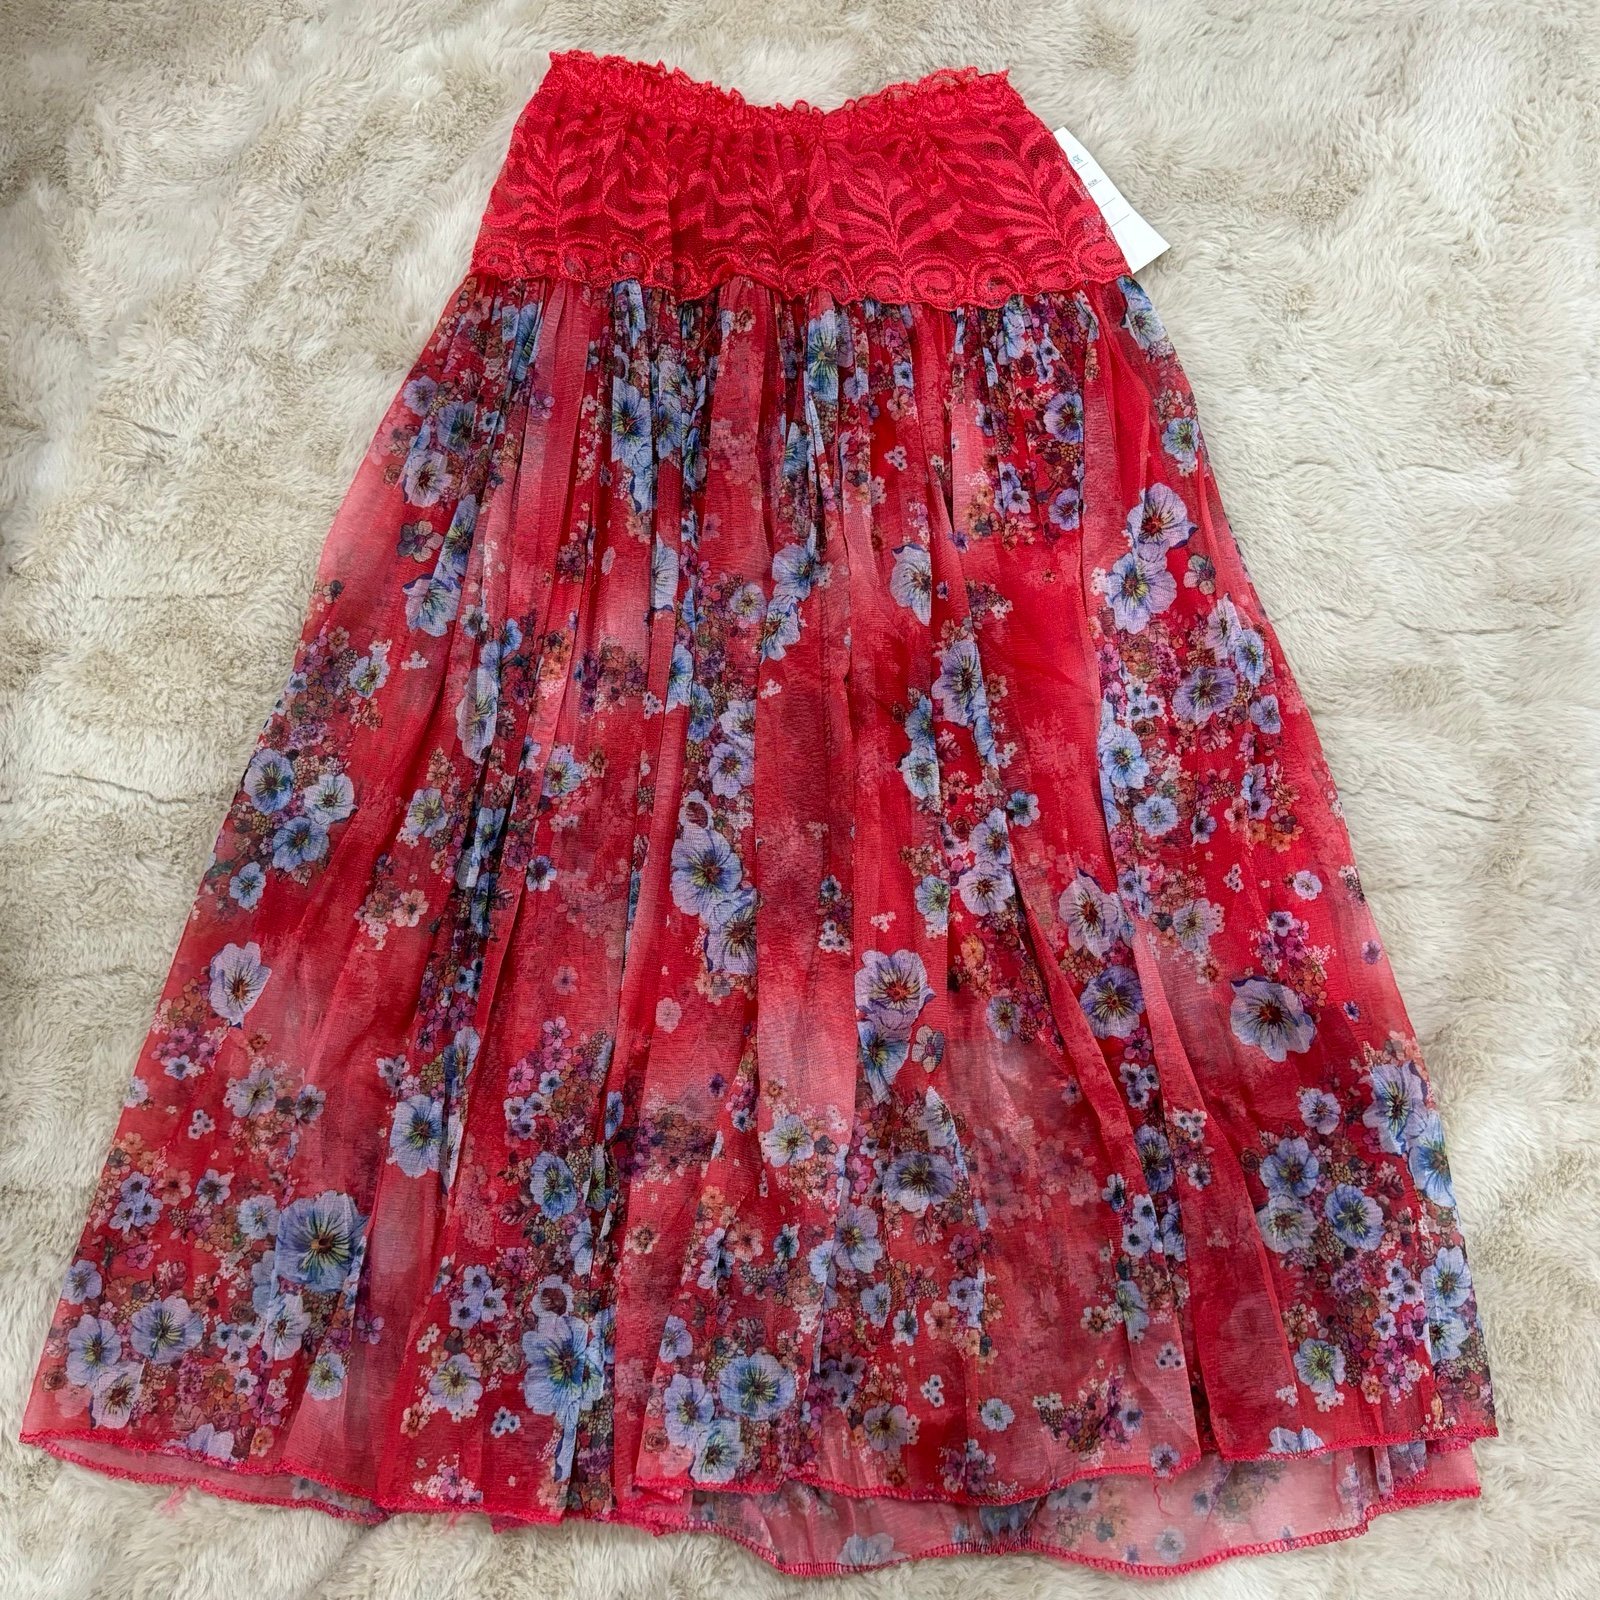 Amazing Floral print mid length skirt red color with mesh material and red fabric nNTSwh5d5 Fashion